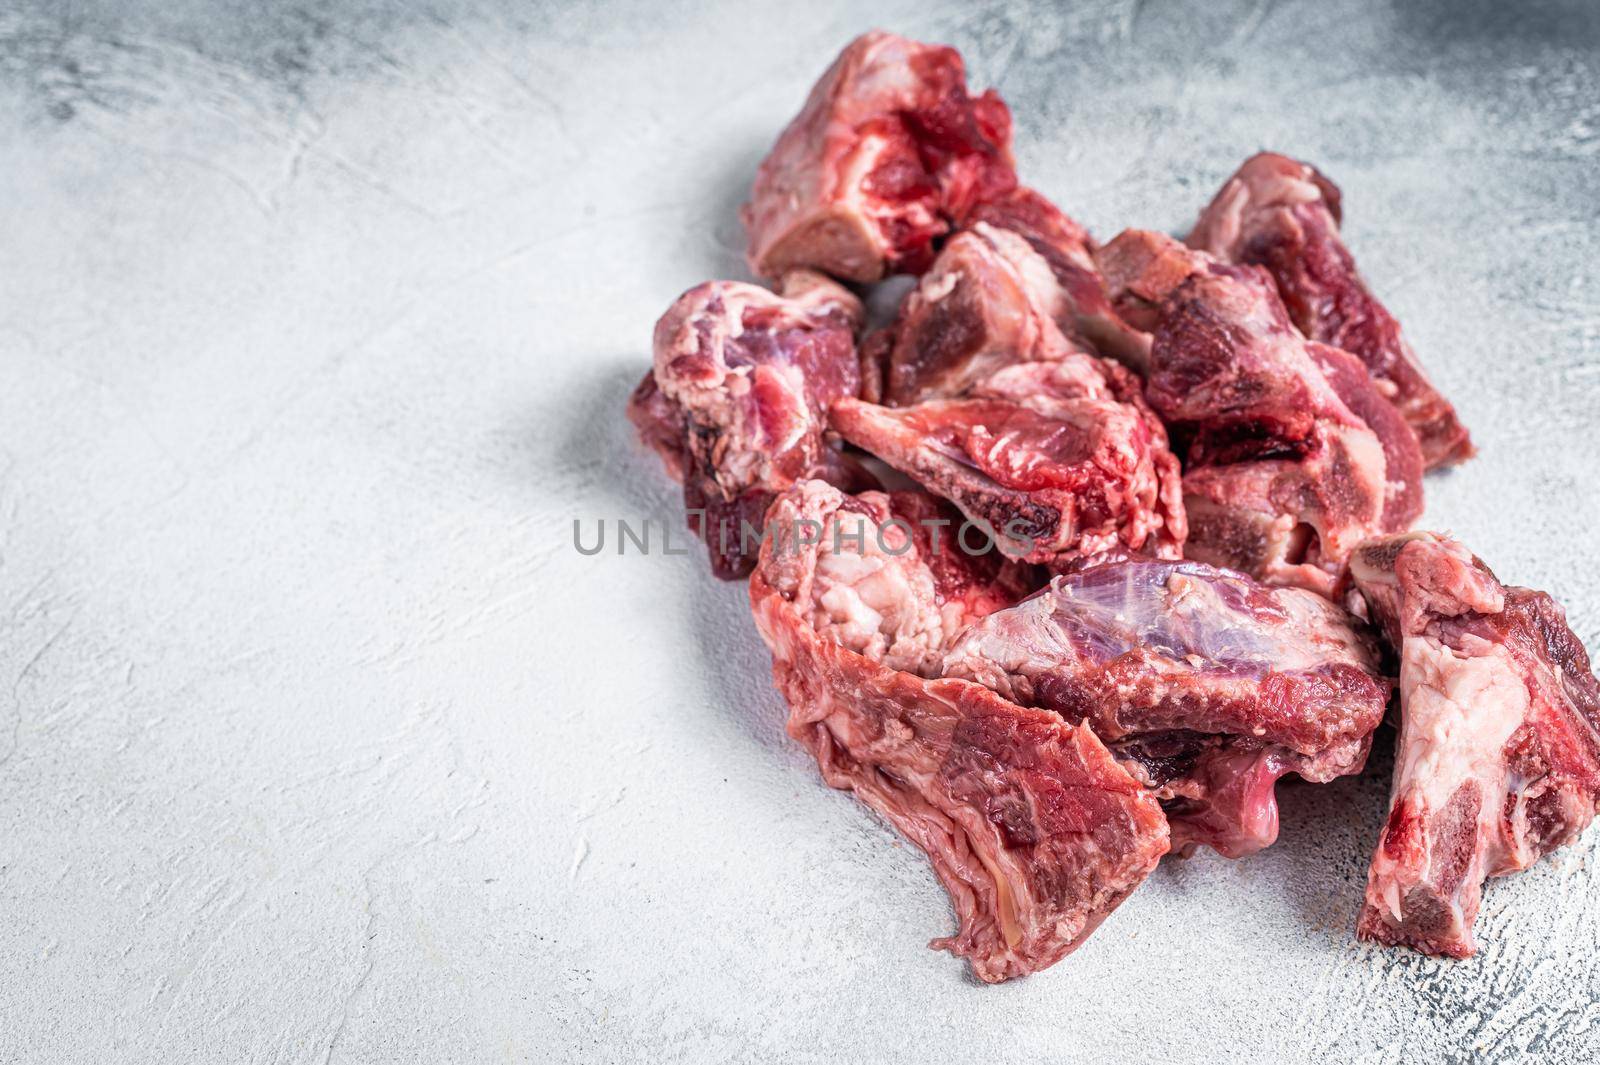 Raw lamb meat stew cuts with bone. White background. Top view. Copy space.